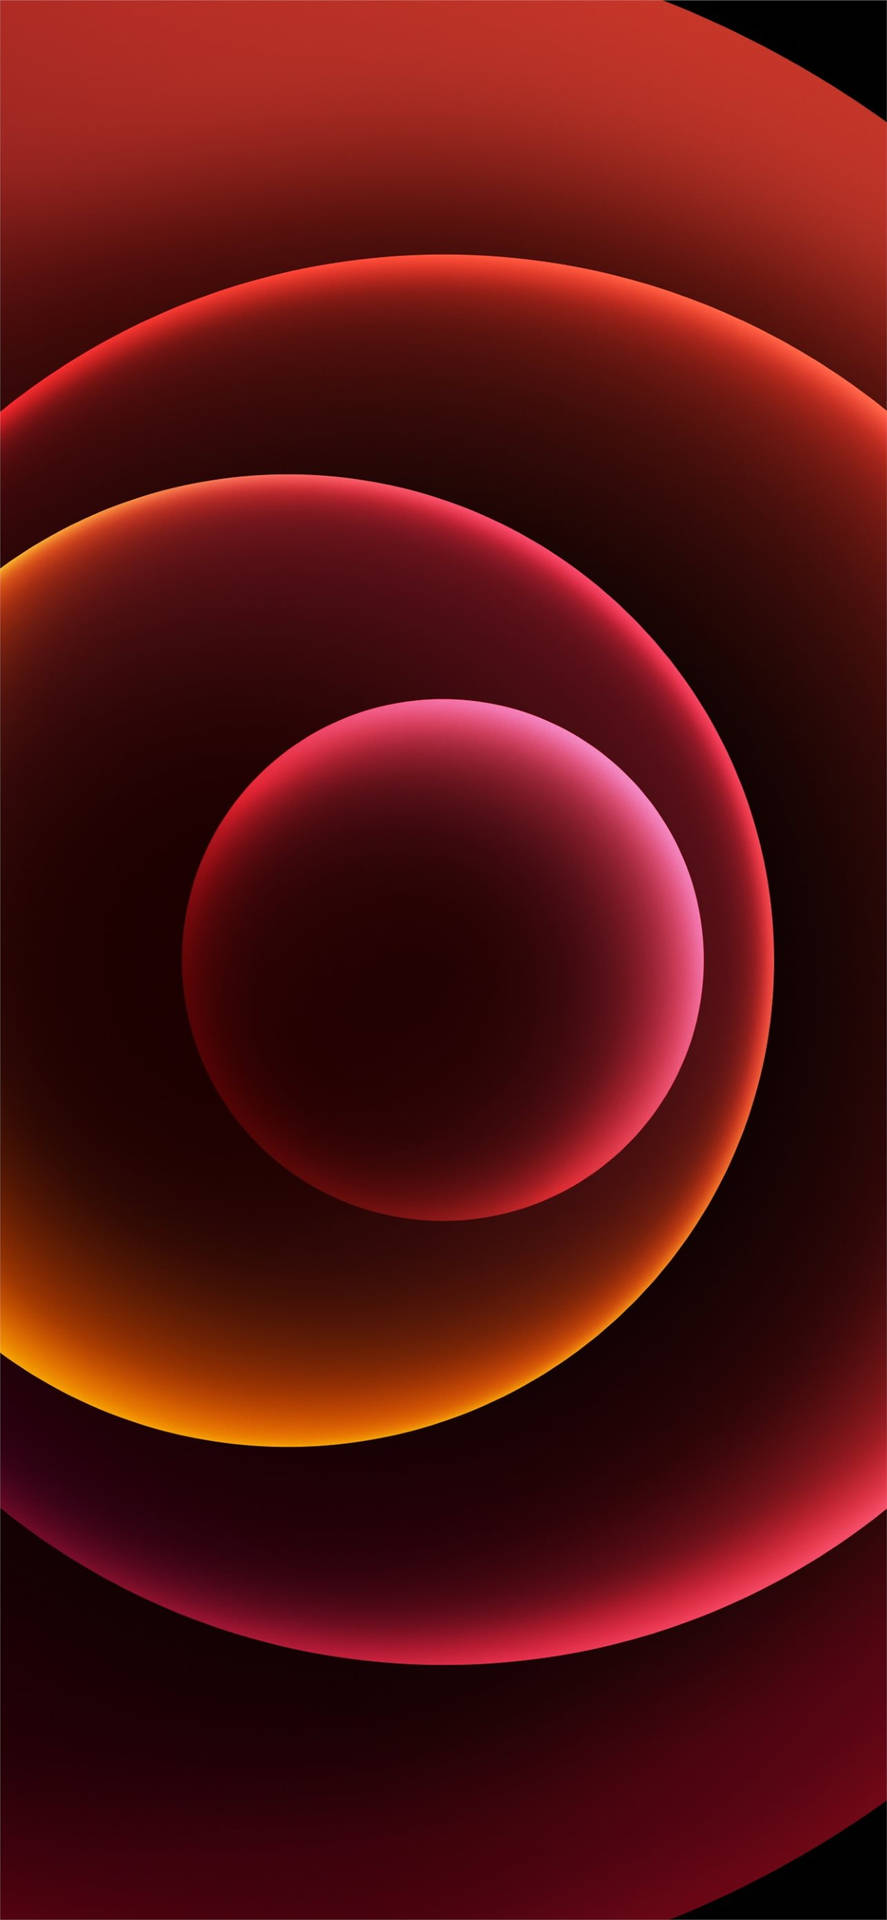 Abstract red and black iPhone Wallpaper